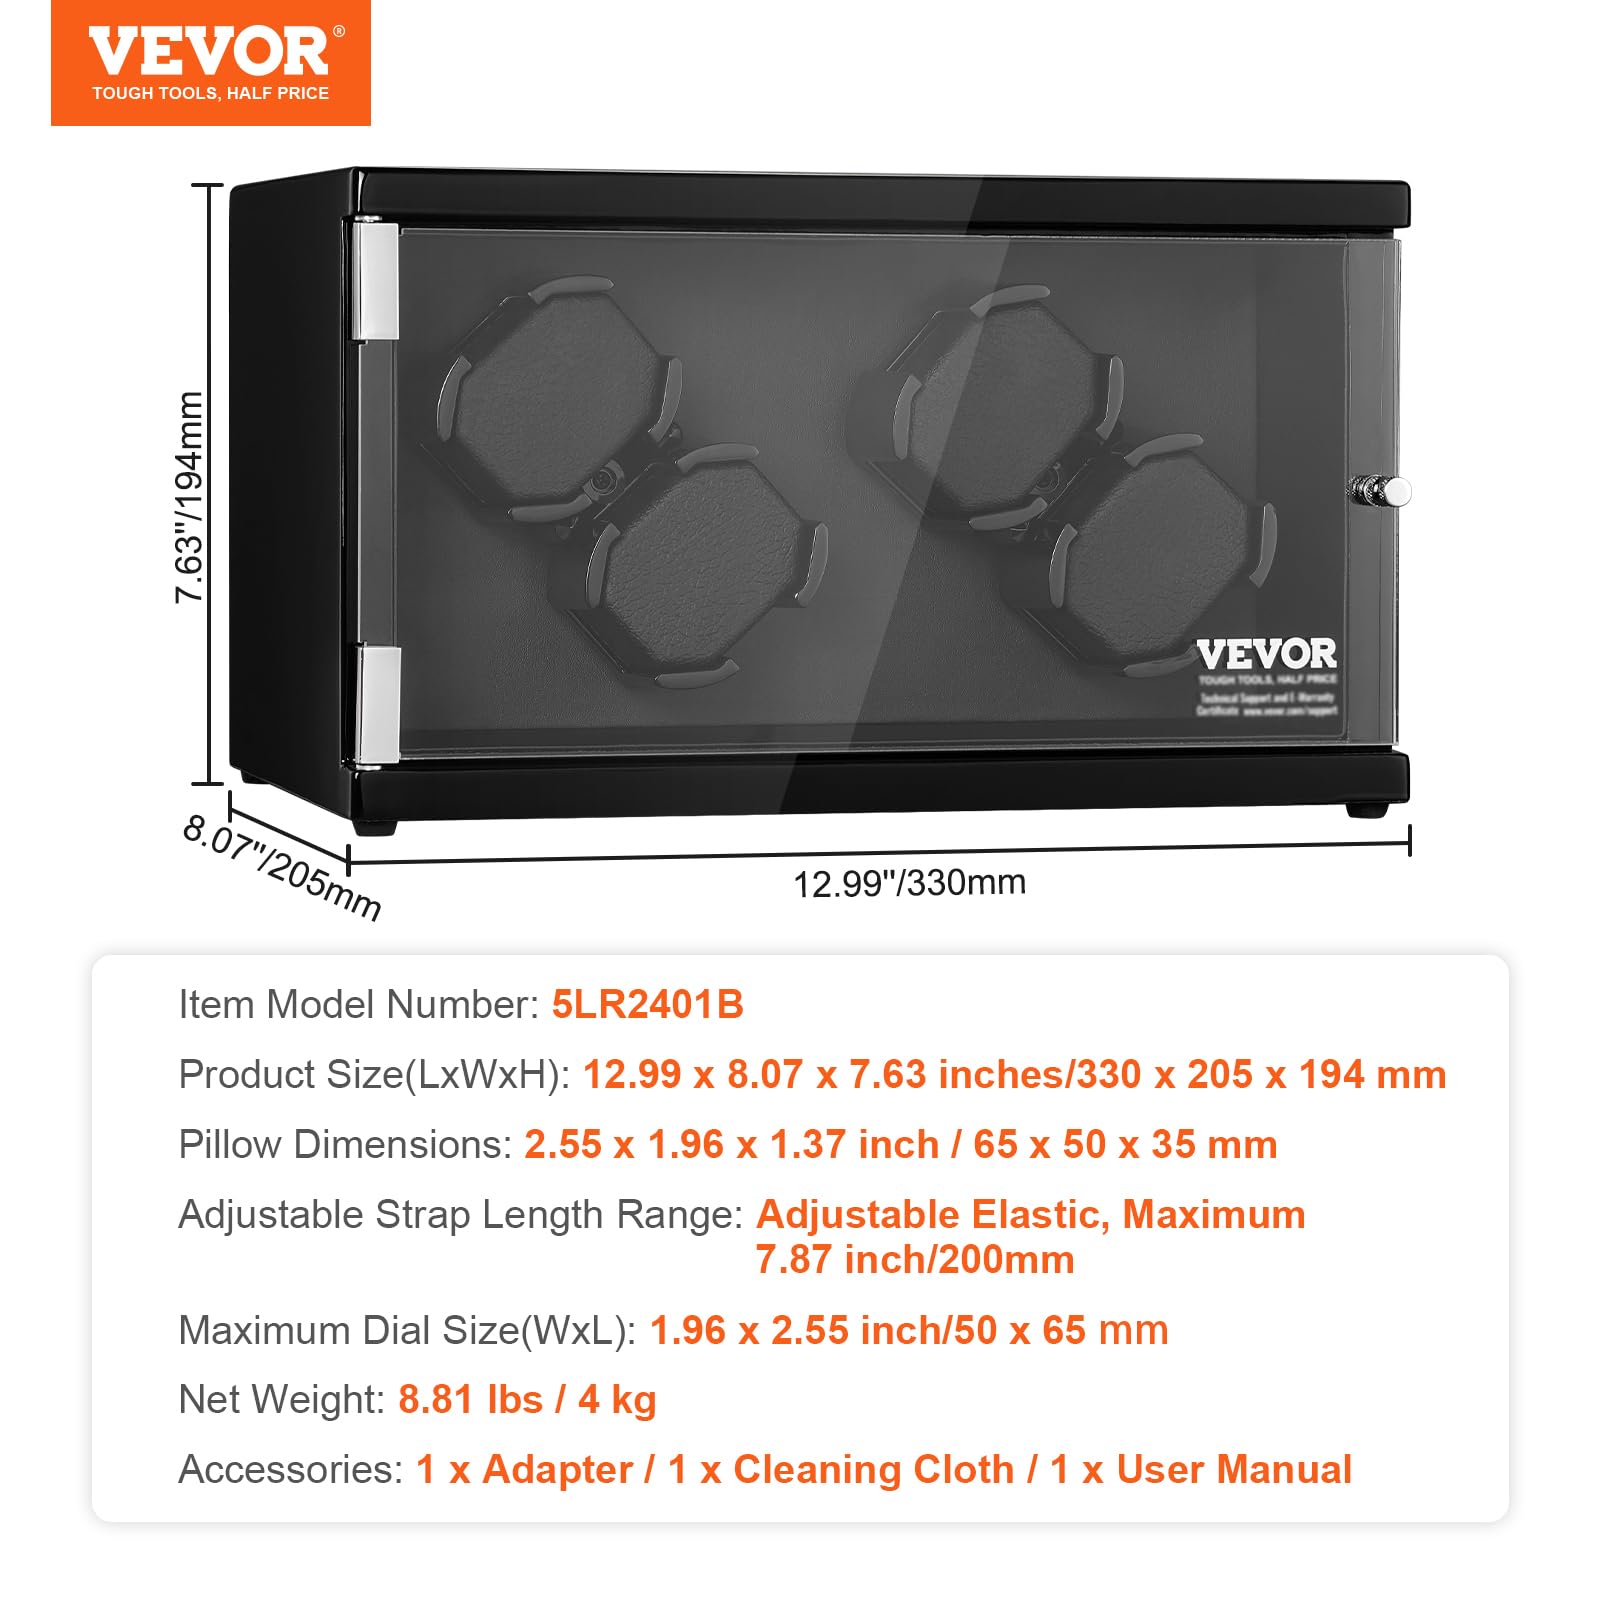 VEVOR Watch Winder, Rotating Watch Box for High-End Automatic Watches, 4 Watch Winder Case with Quiet Japanese Motors, LED Light, Adjustable Direction and Speed, Multi Modes